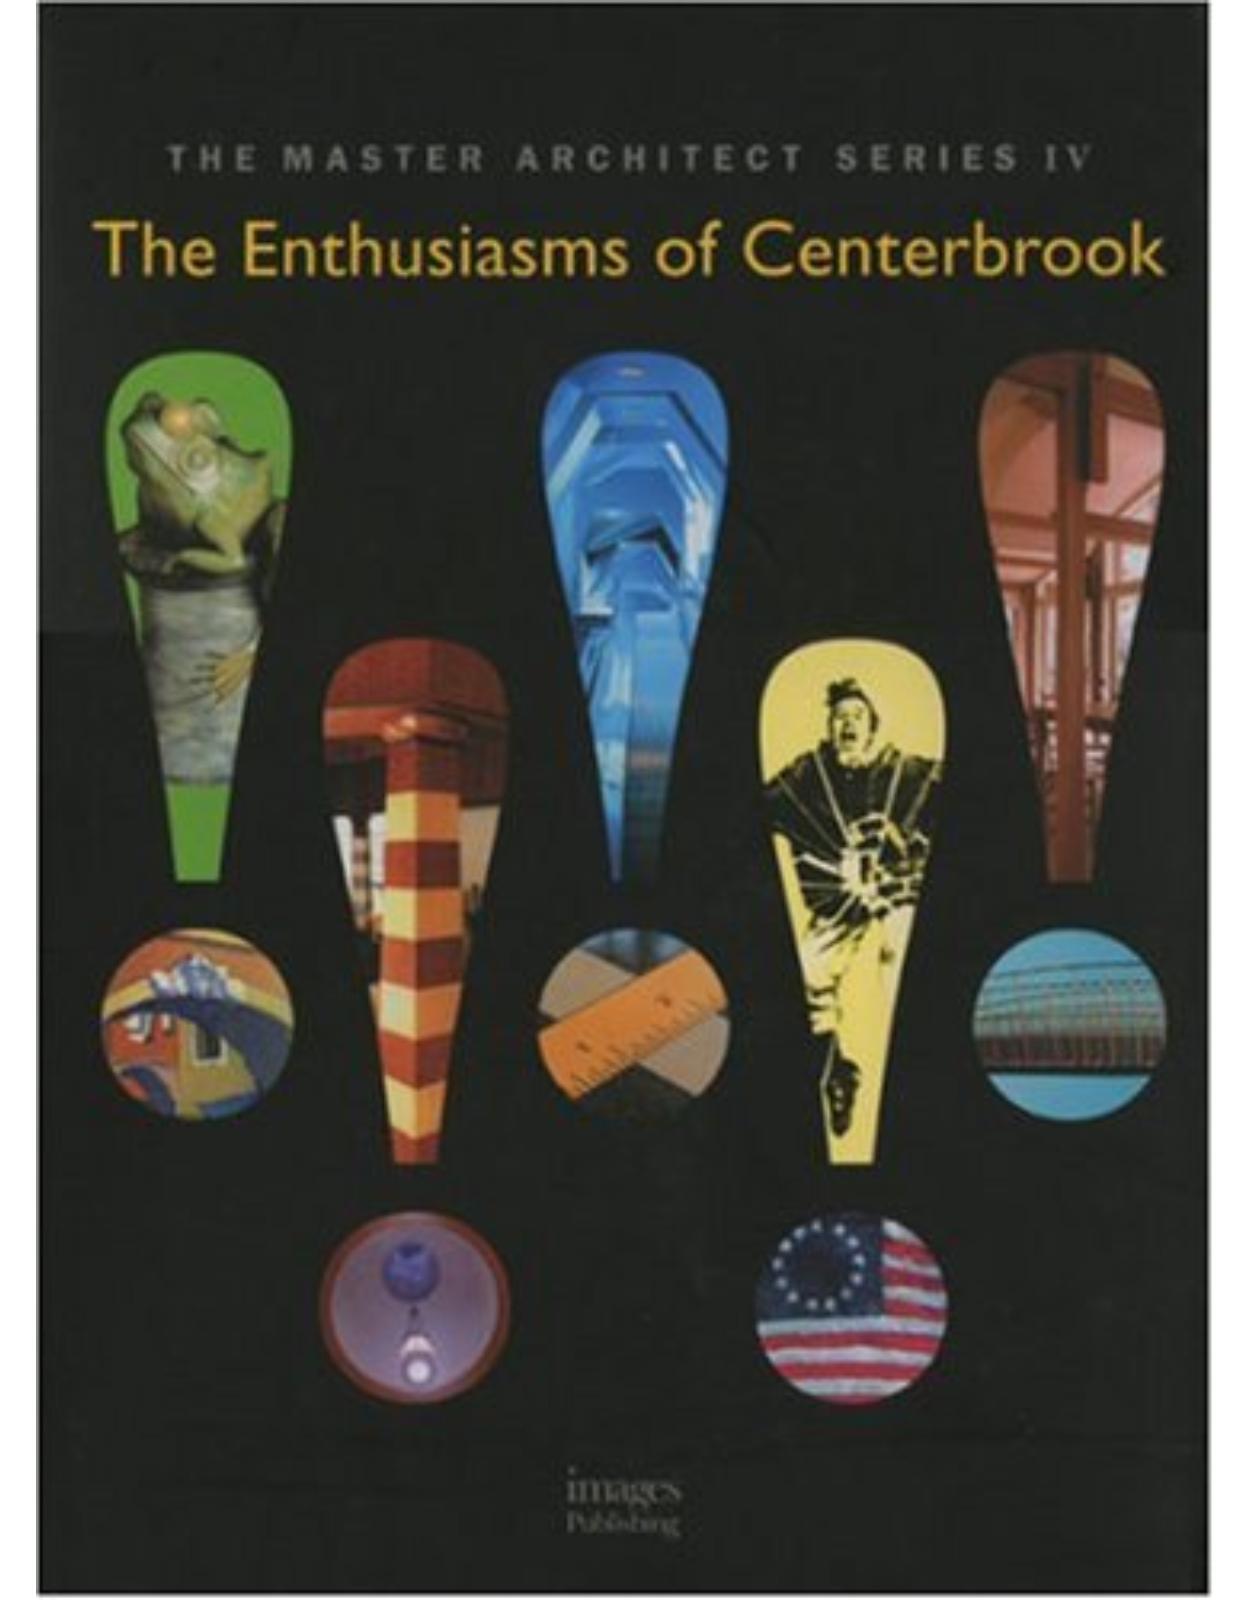 The Enthusiasms of Centrebrook: Selected and Current Works (Master Architect Series IV)